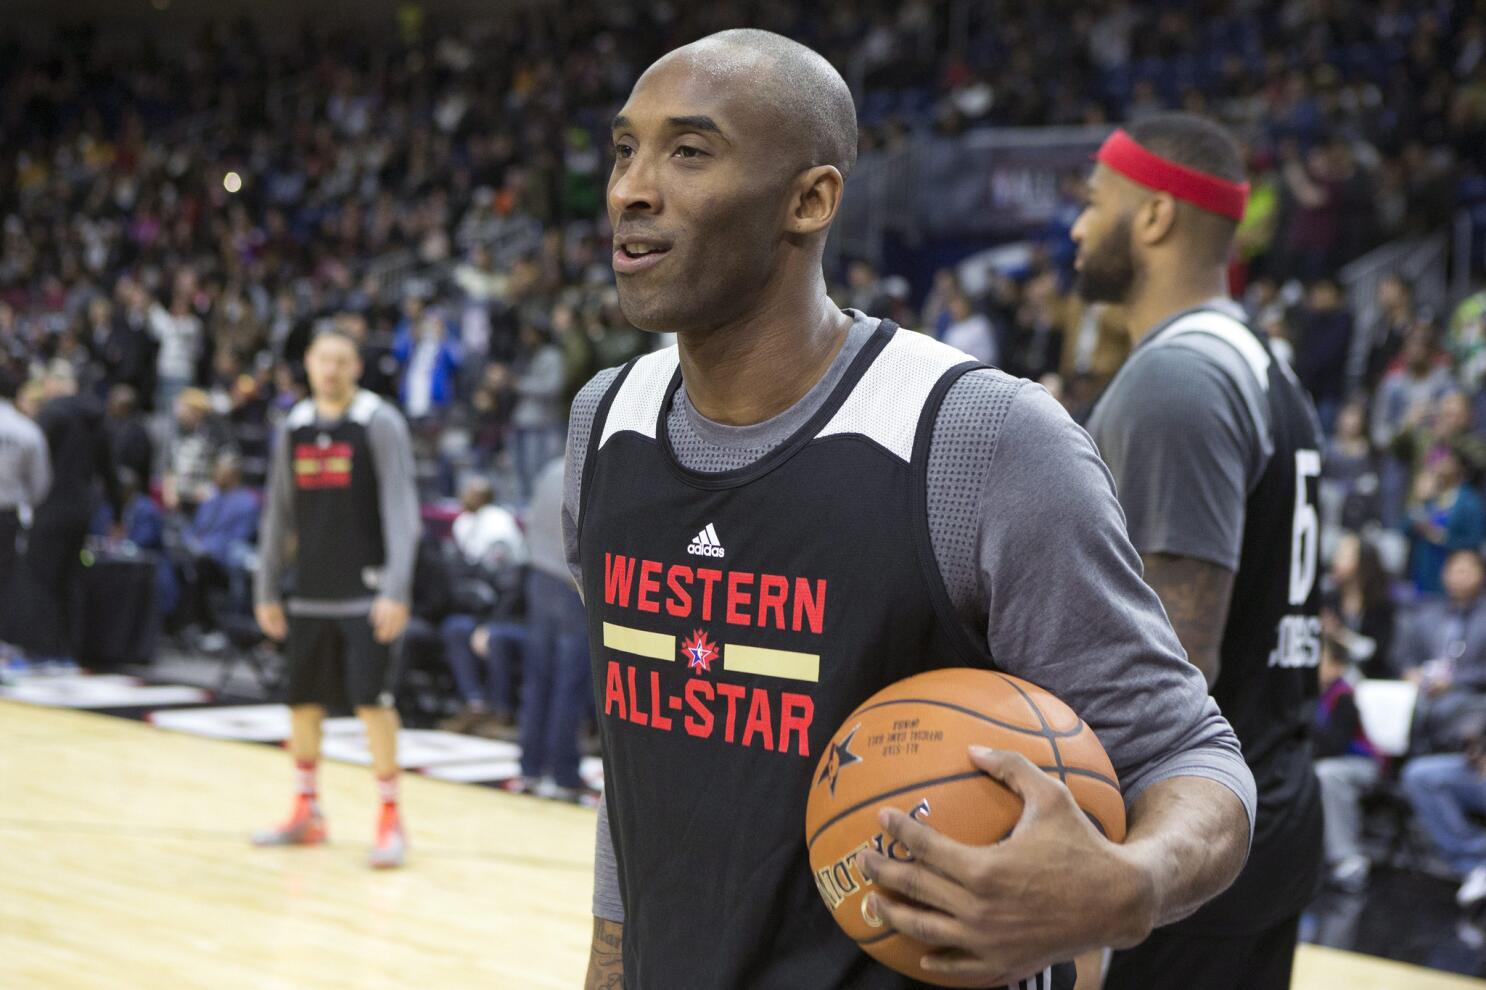 Adidas Reveals 2013 NBA All-Star Jerseys for East and West Teams